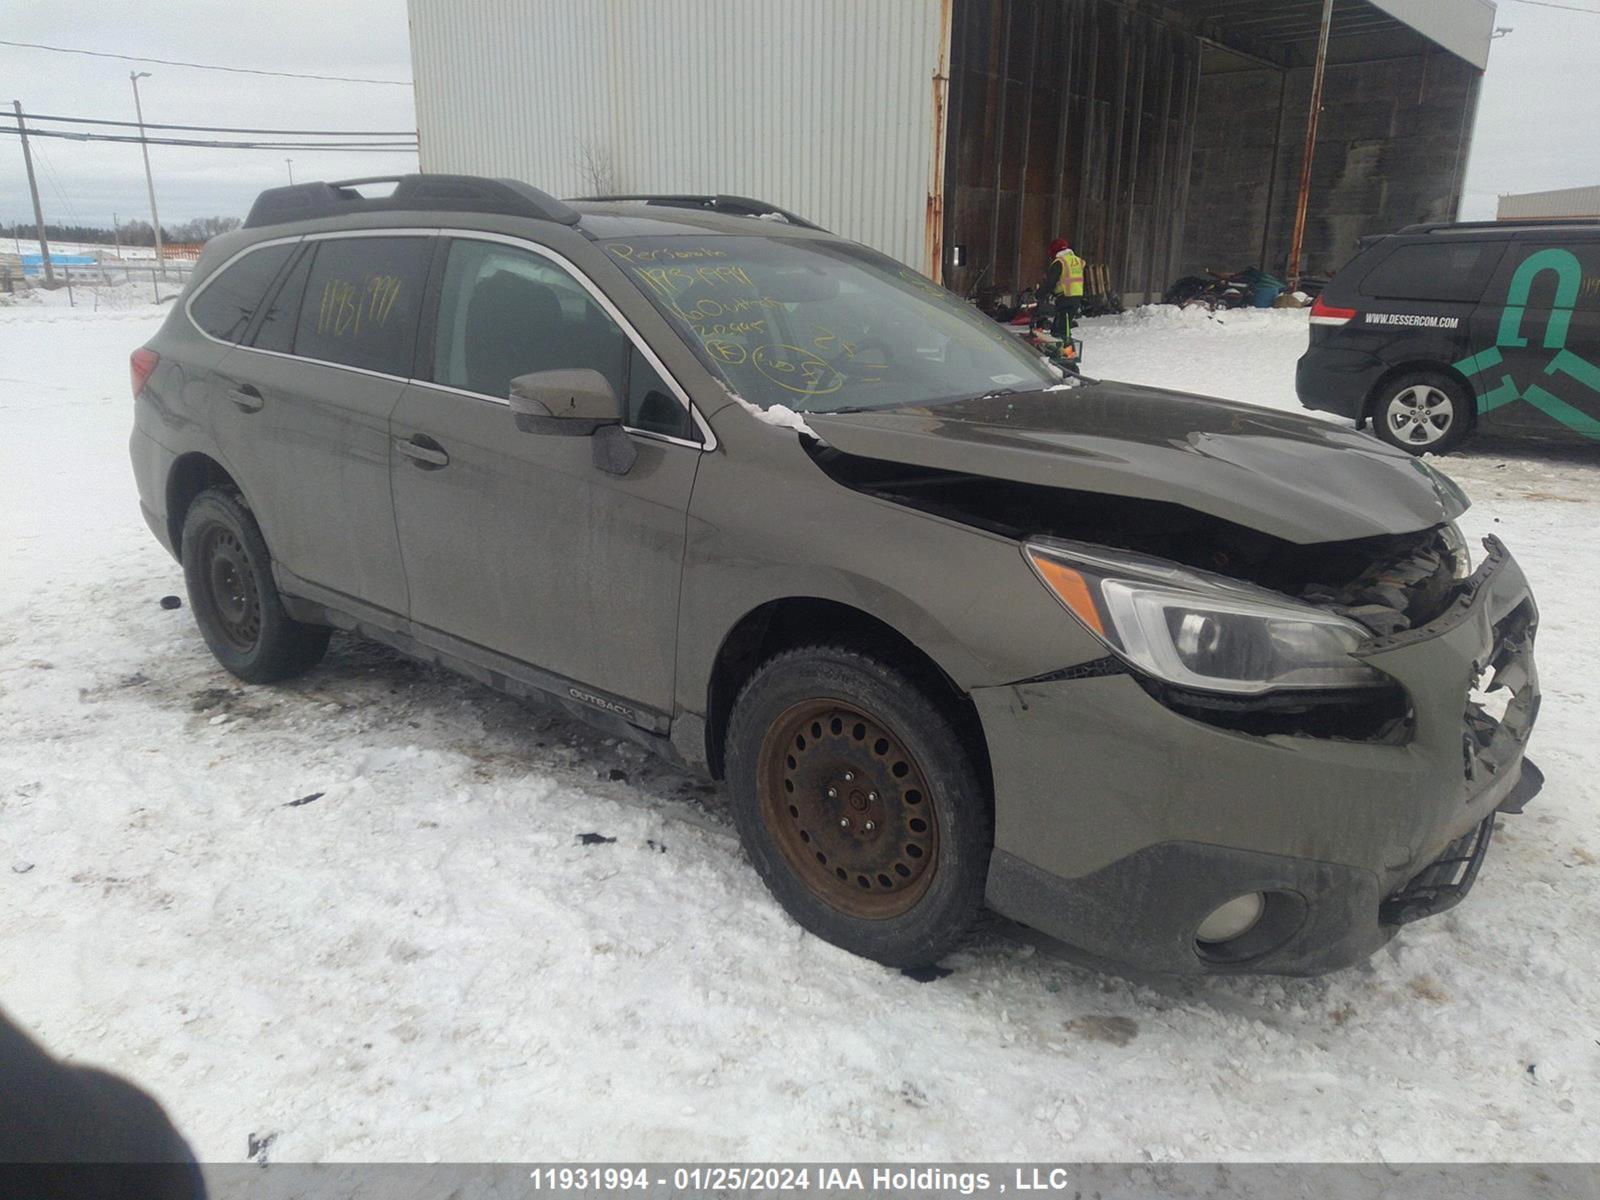 vin: 4S4BSCDCXG1212445 4S4BSCDCXG1212445 2016 subaru outback 2500 for Sale in g7a1a9, 1215 Industriel , St-Nicolas, Quebec, Canada